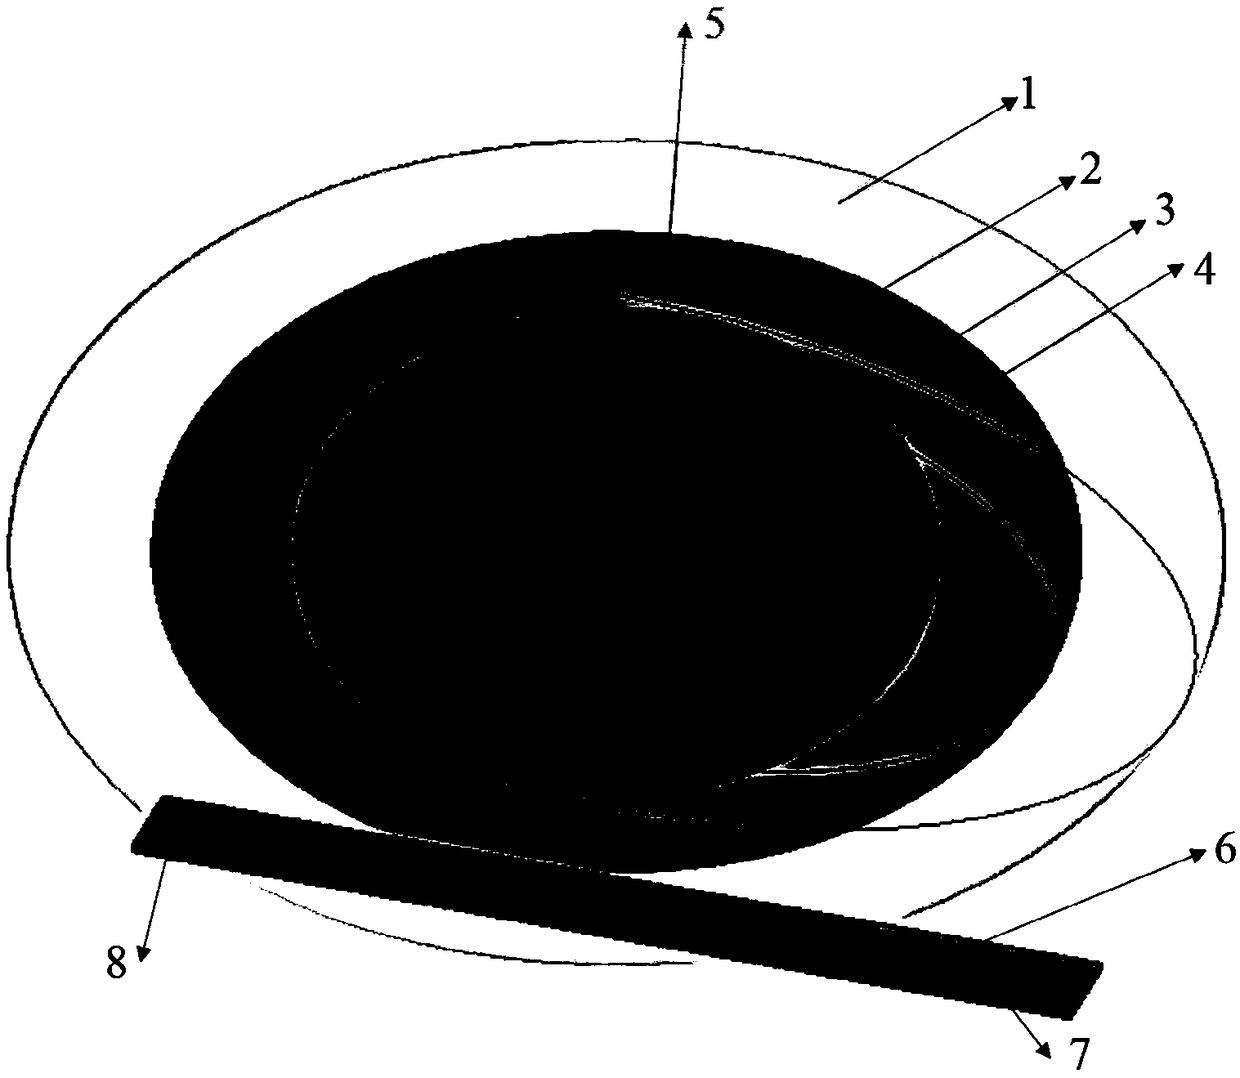 Wide angle scanning ellipsoidal dielectric lens antenna based on phased array feed